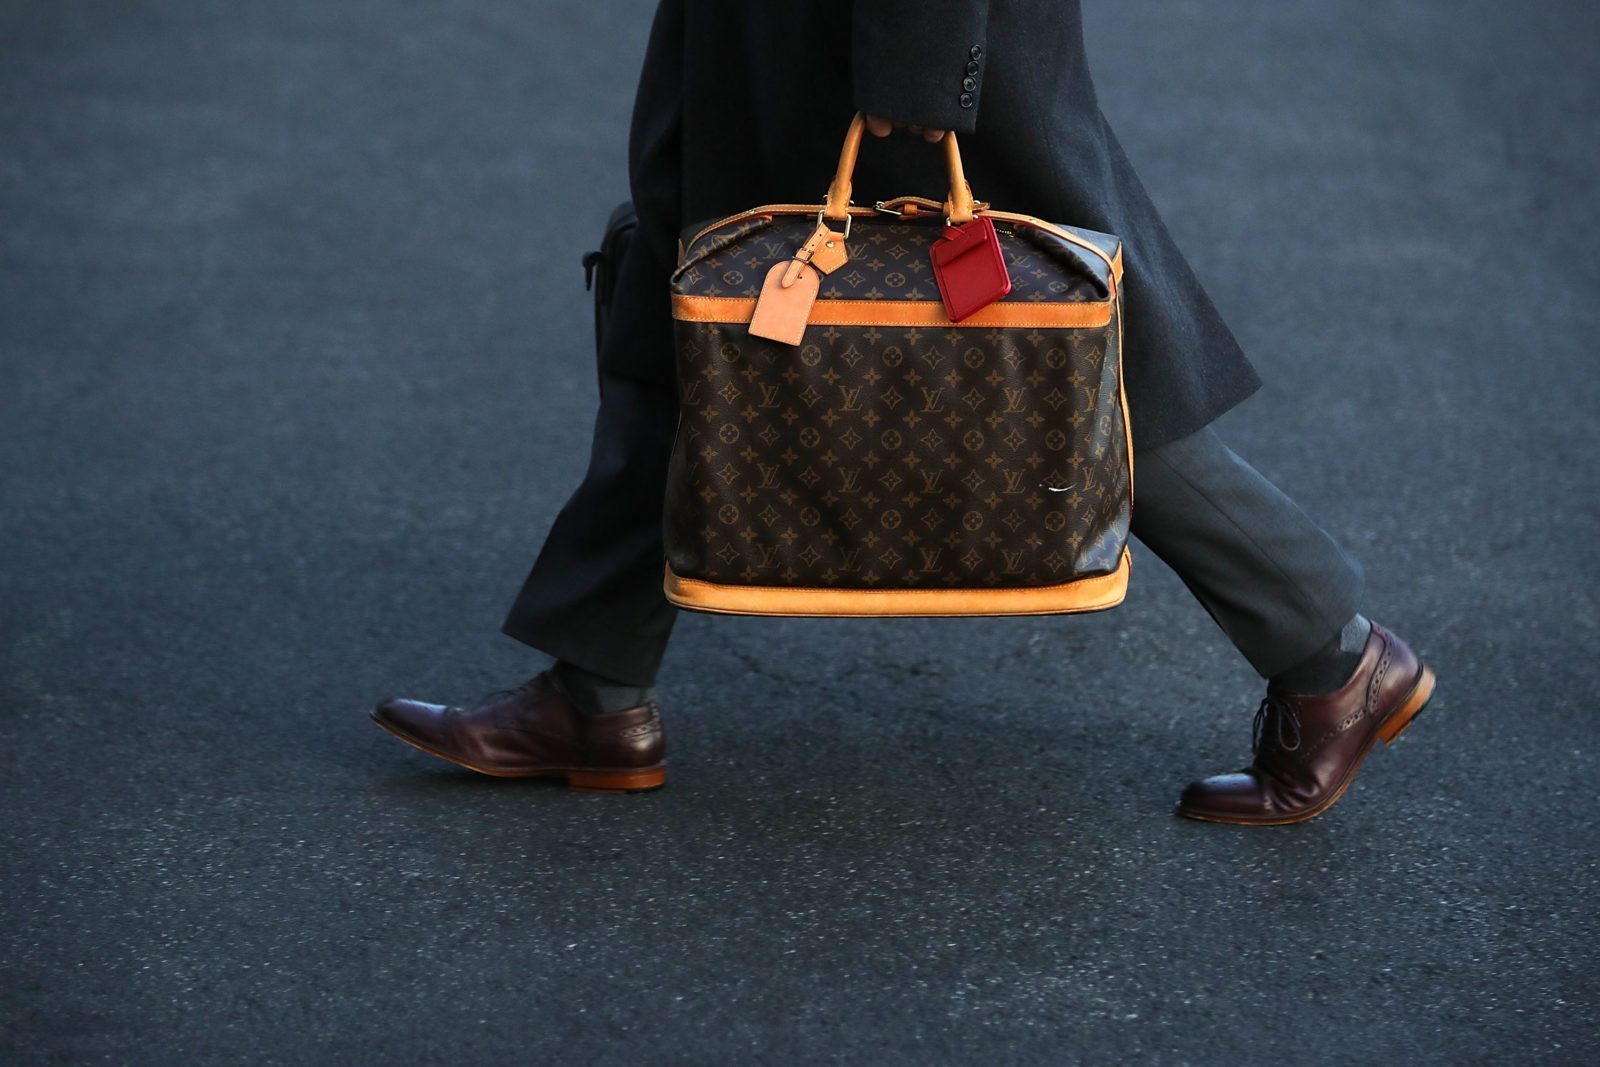 Gay man risks being shot by armed robber to save his Louis Vuitton bag